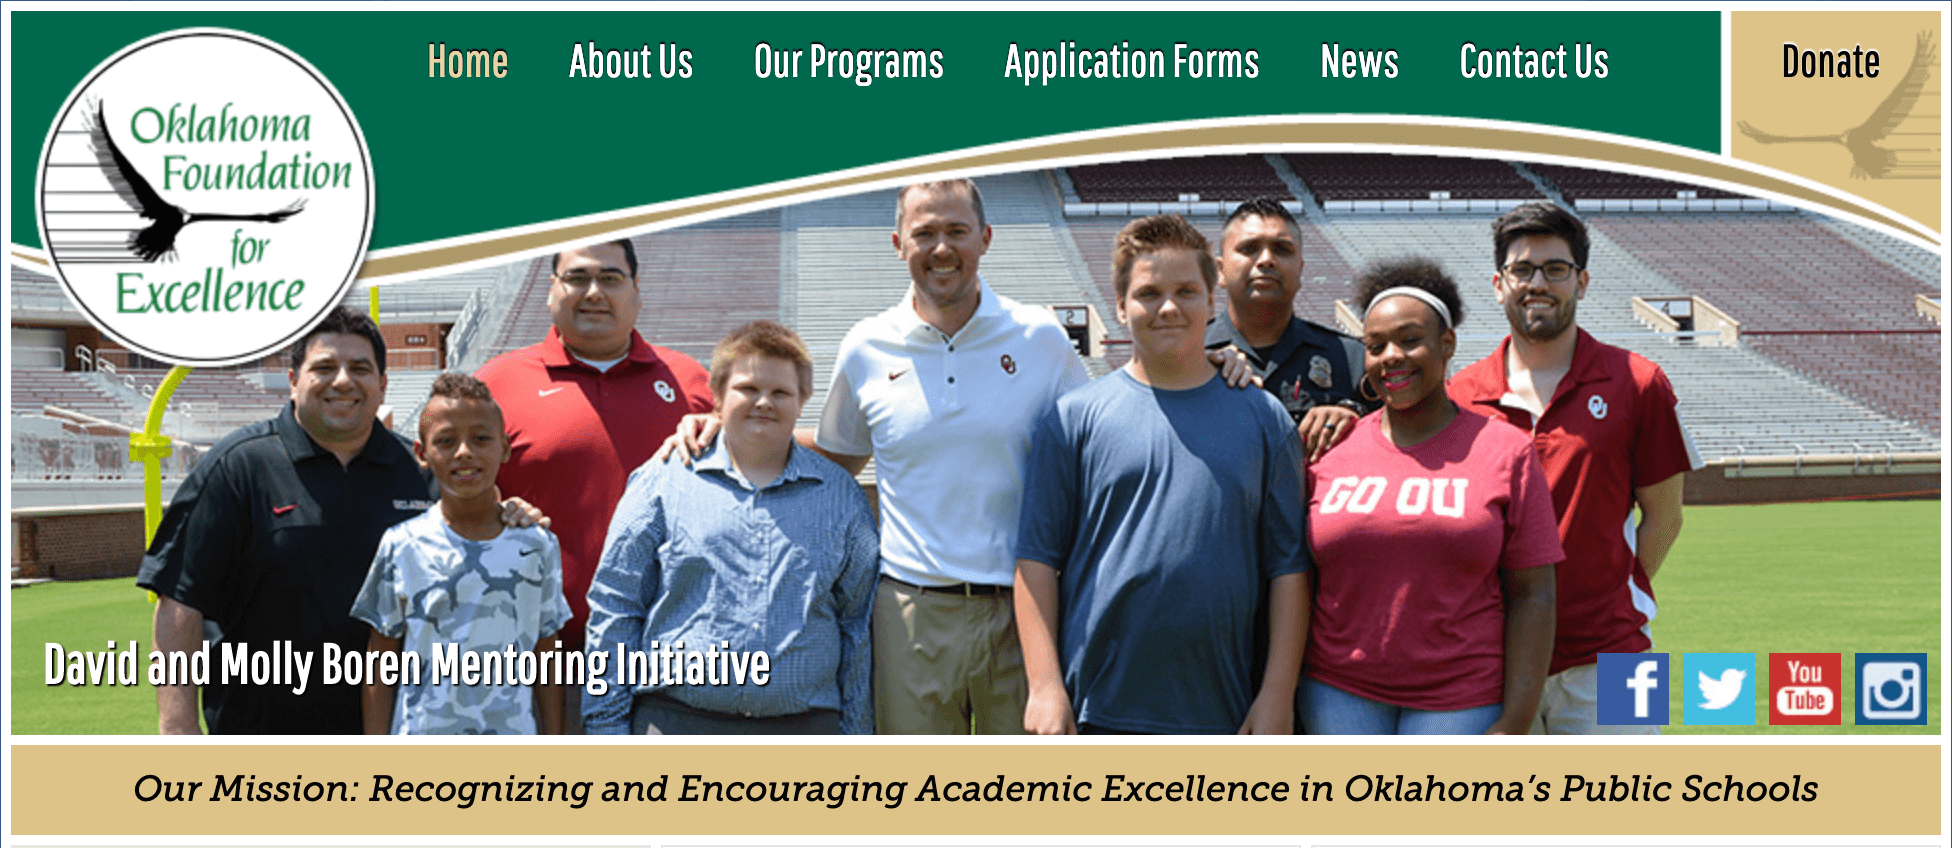 Oklahoma Foundation for Excellence